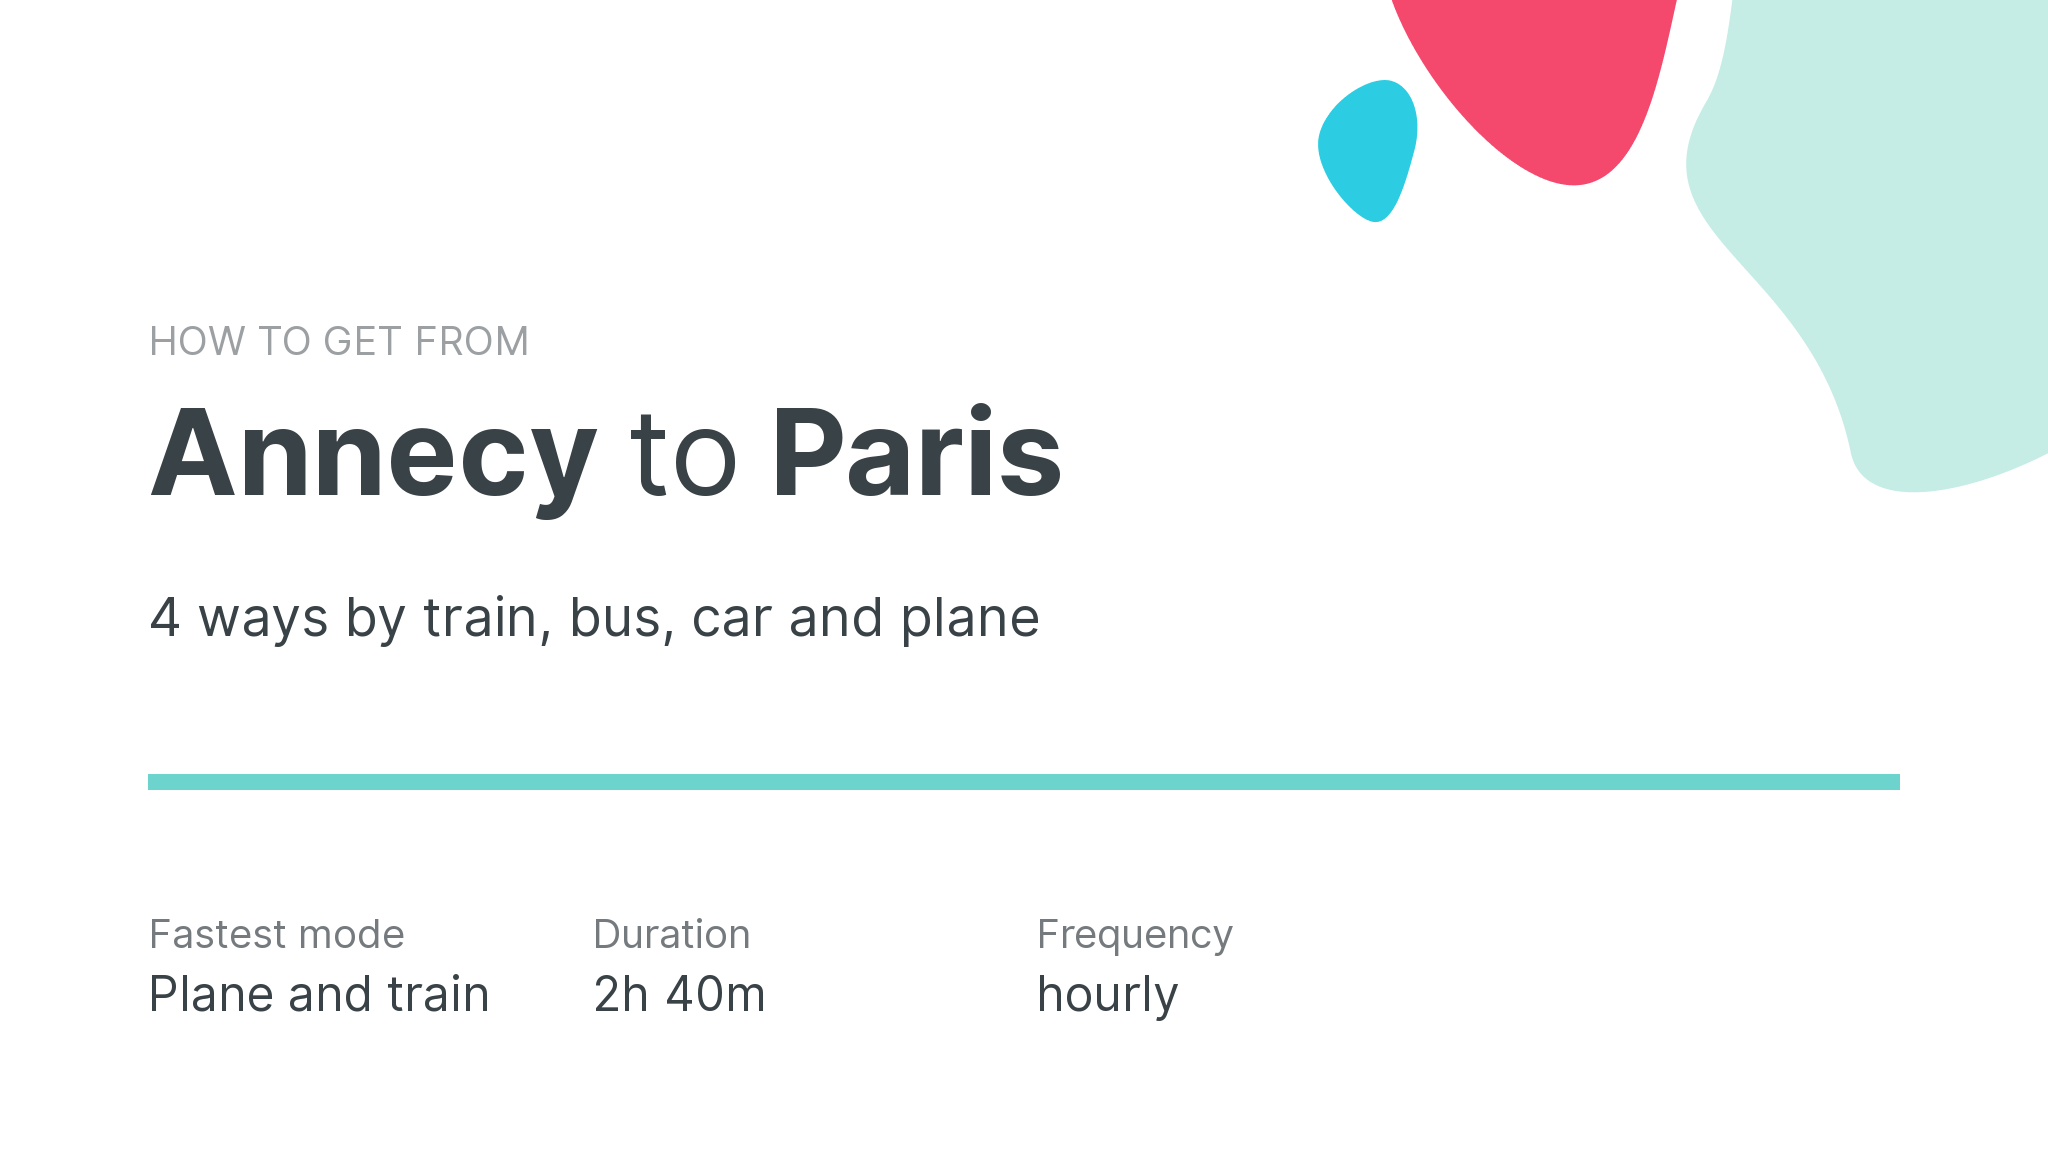 How do I get from Annecy to Paris